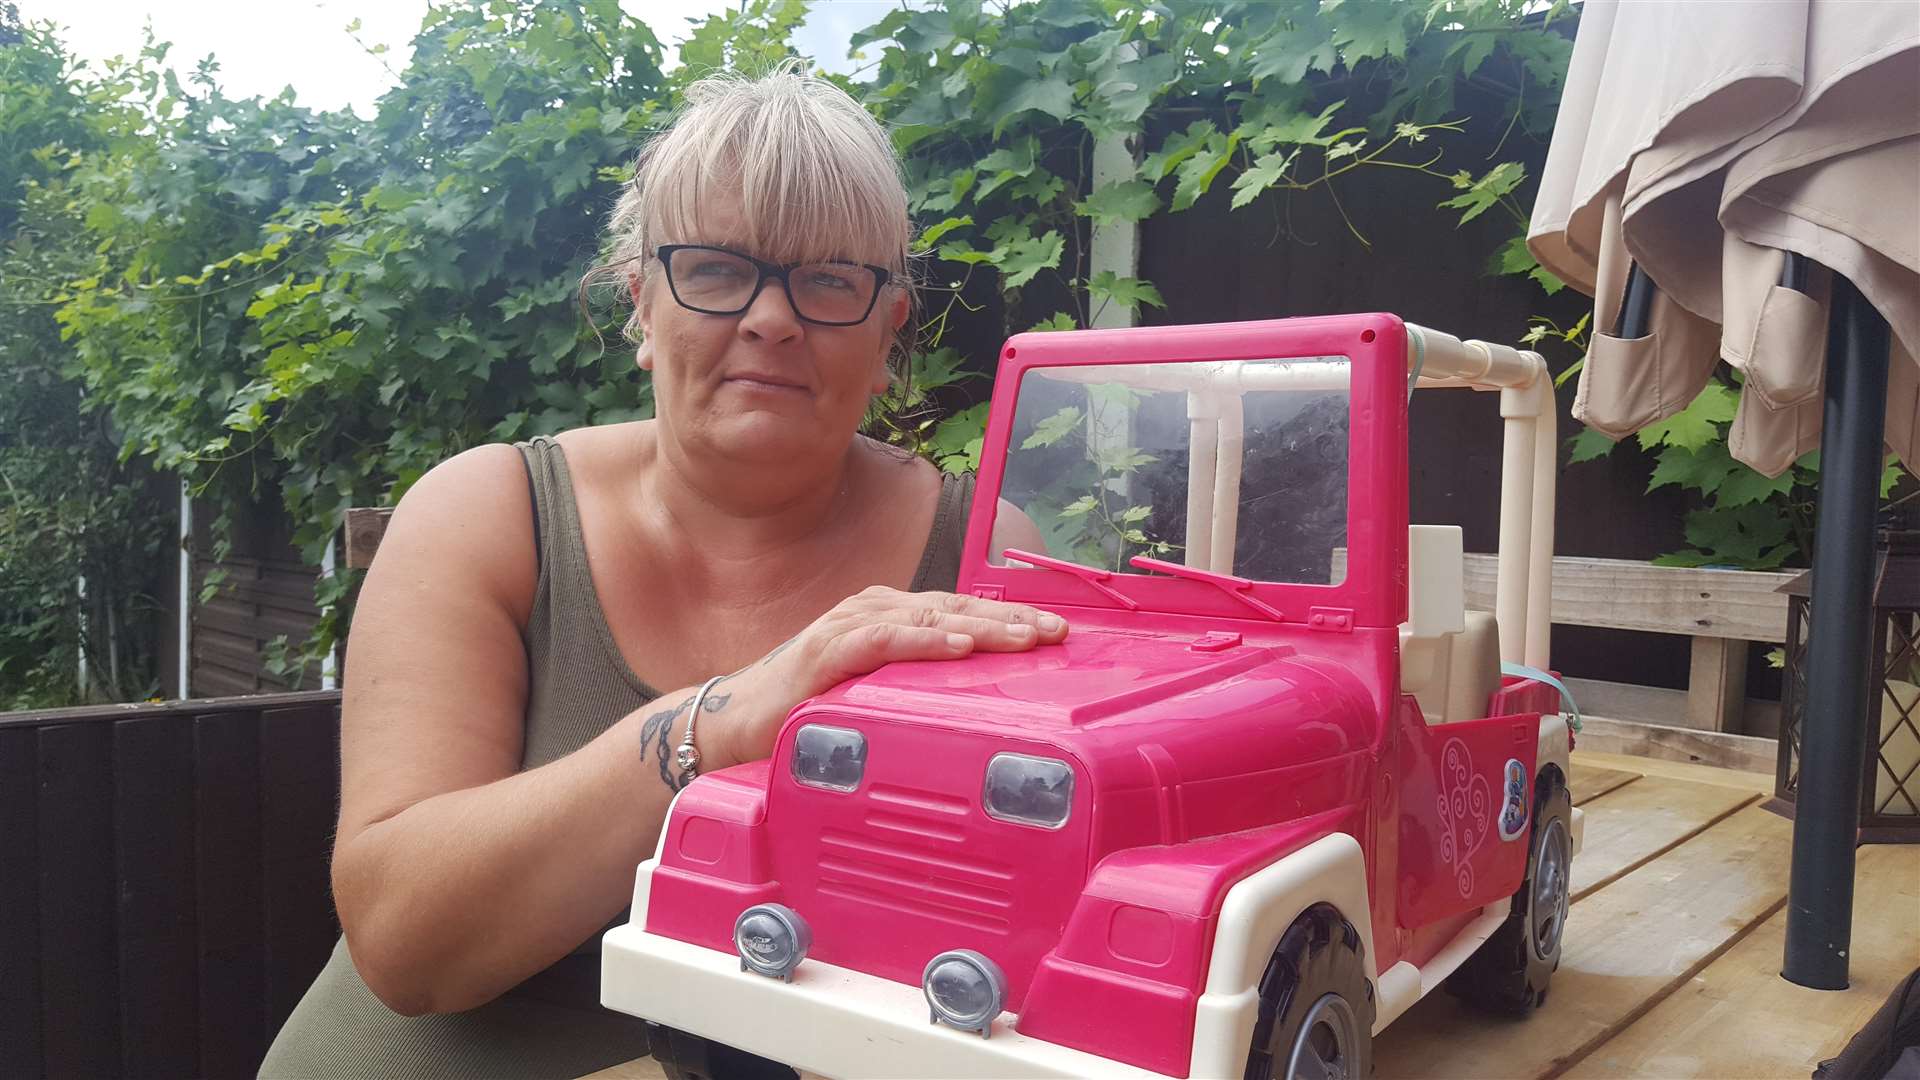 Tina Foster with the car she used to fight off the intruders